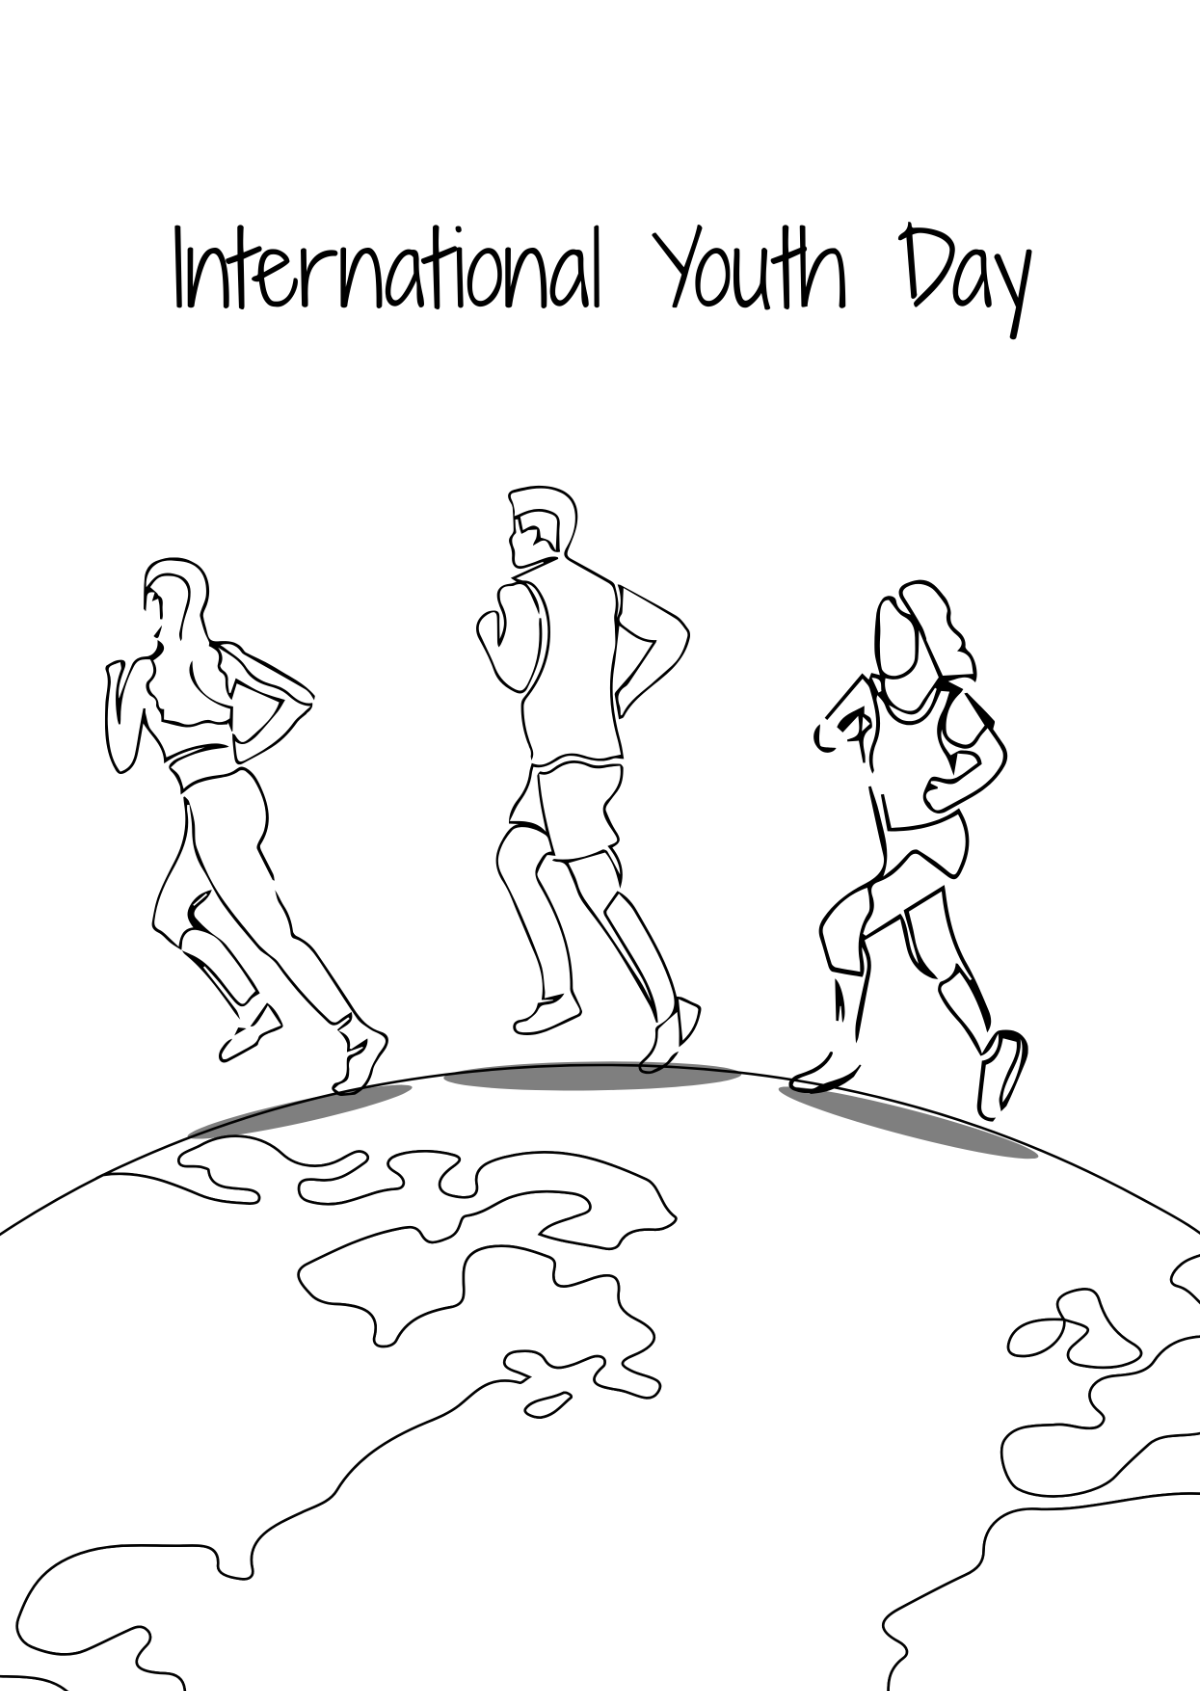 International Youth Day Drawing